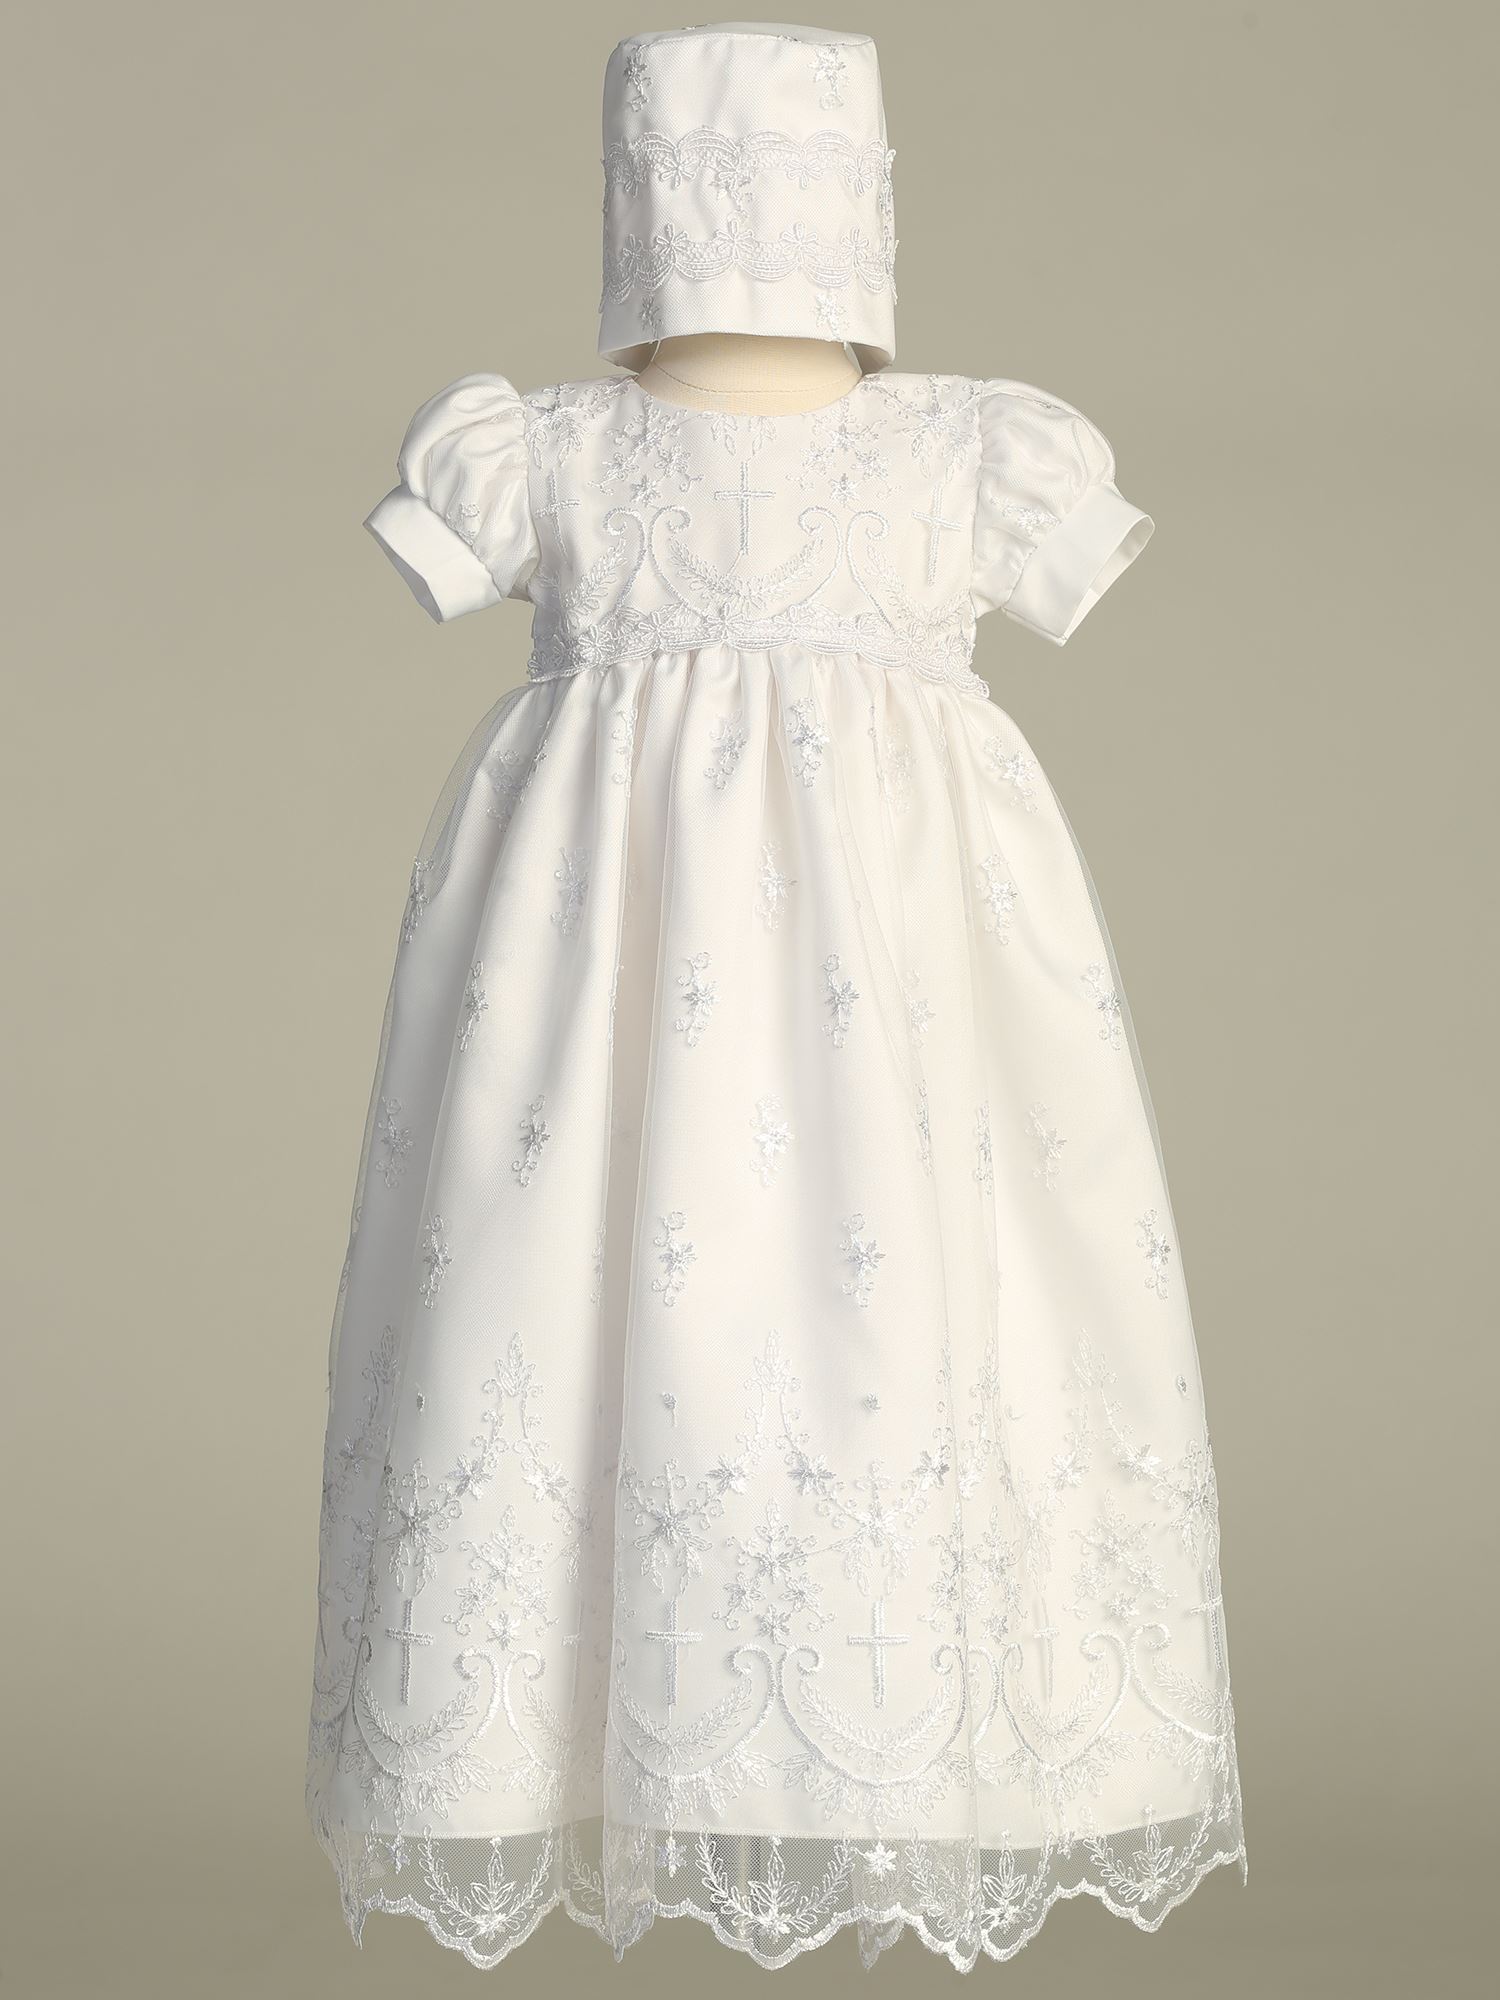 Savannah Embroidered Tulle Christening Gown with Crosses and Bonnet